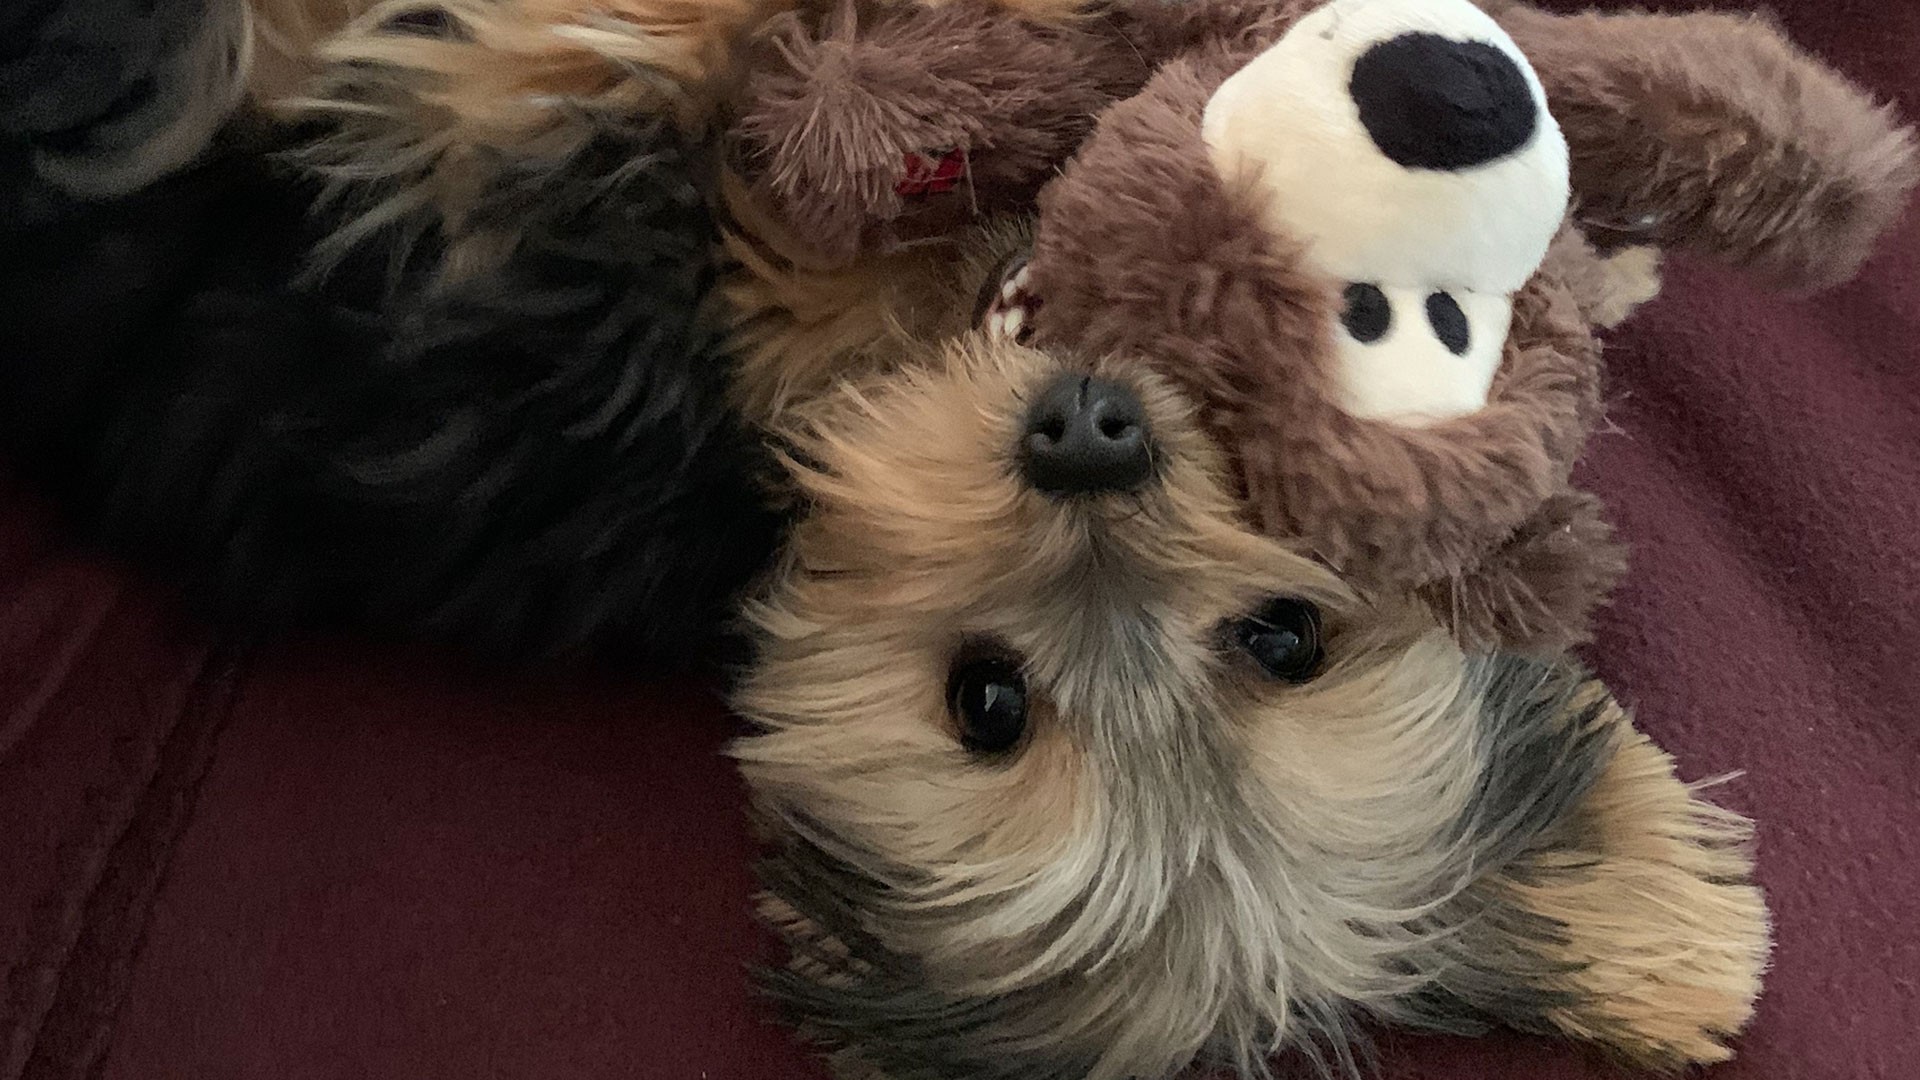 A puppy on a blanket with a soft toy monkey.